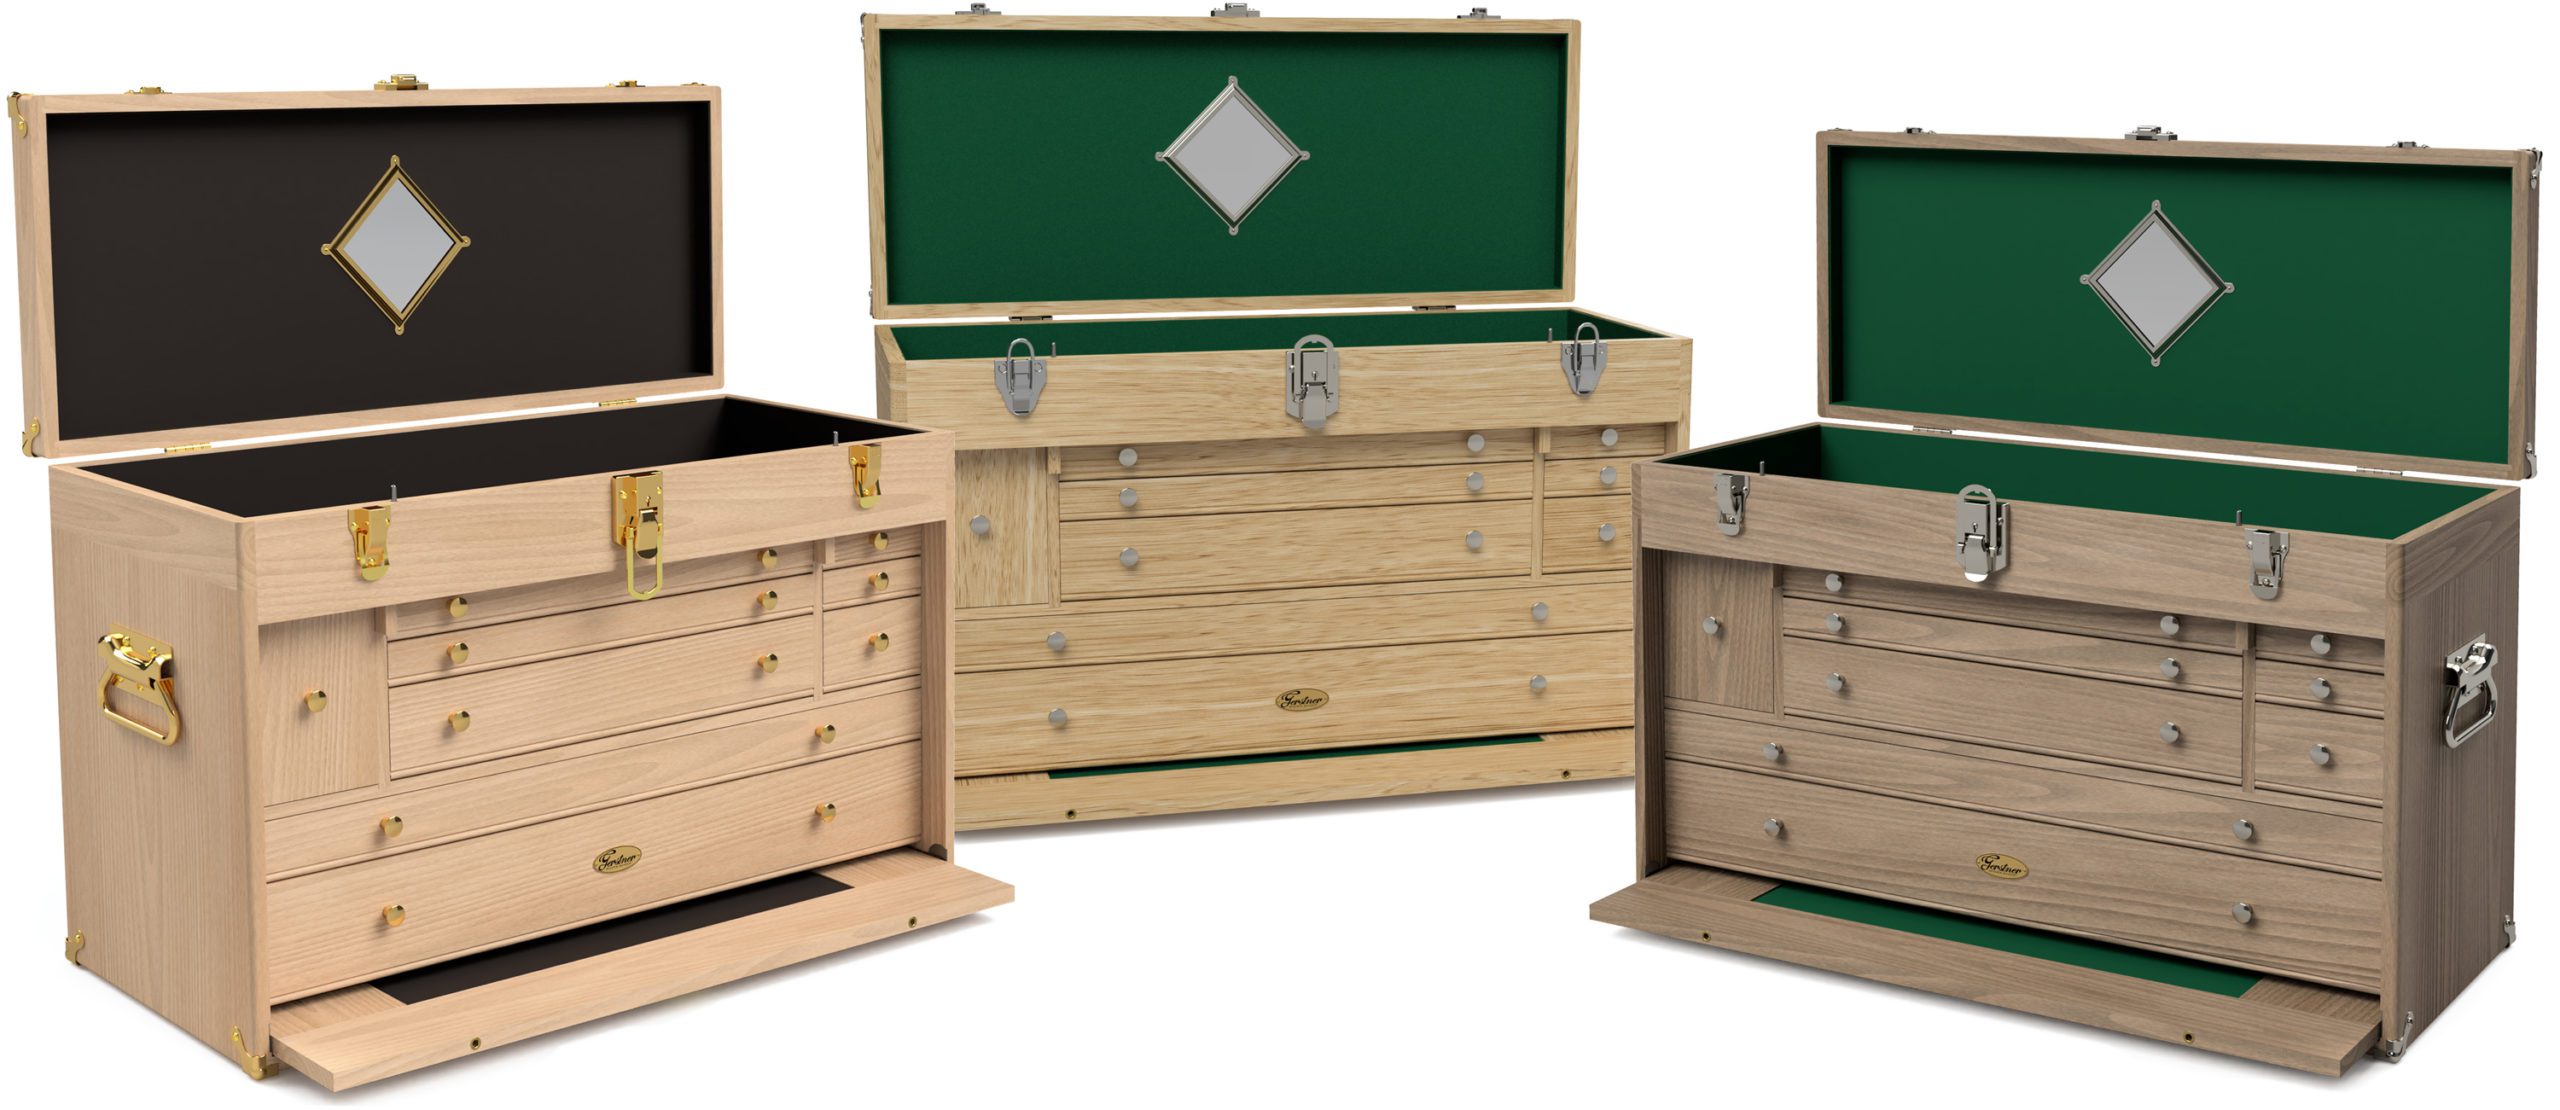 Every Craftsman Should Own the Gerstner Oak Top Chest - Penn Tool Co., Inc